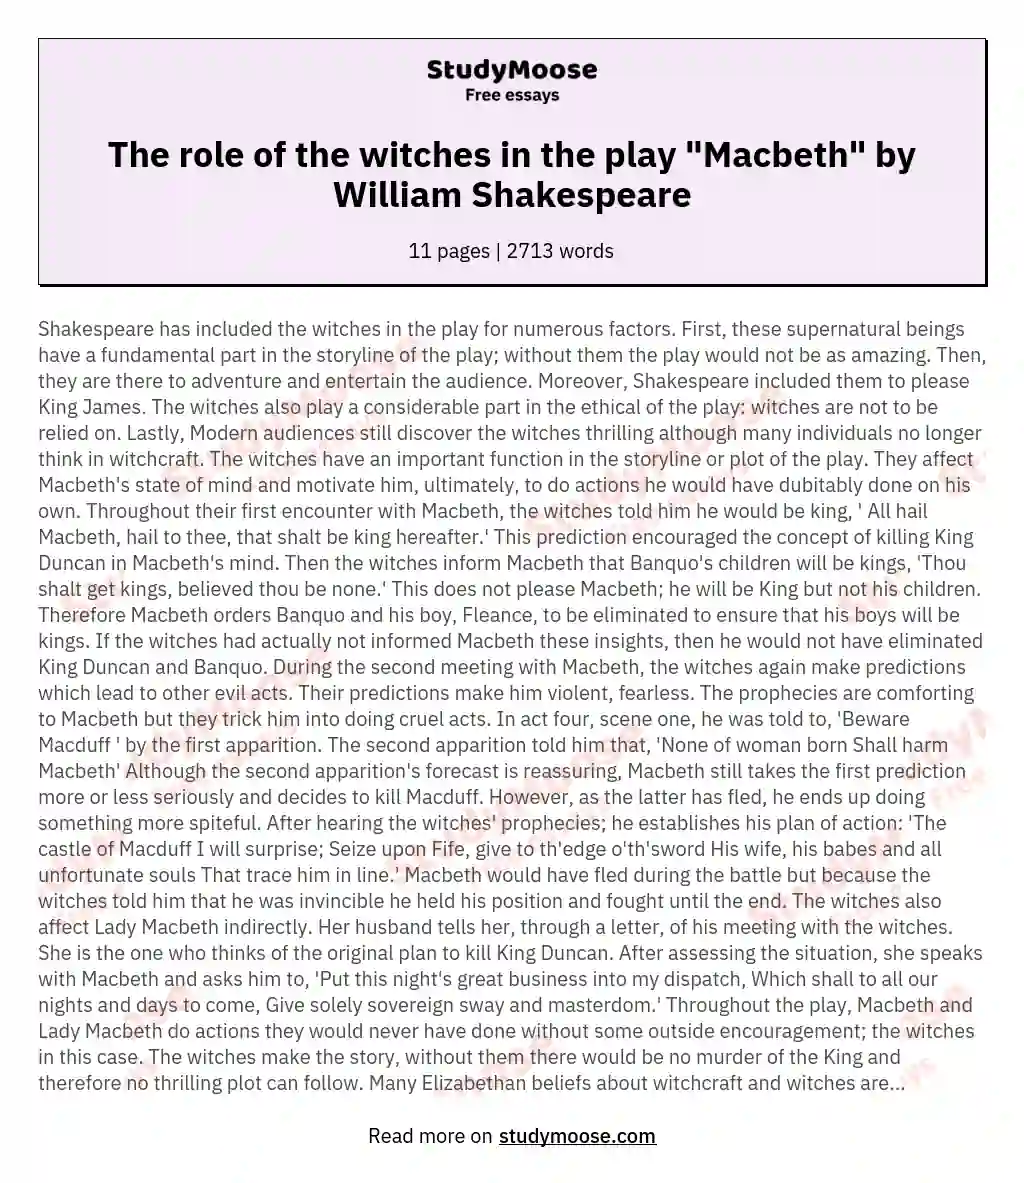 The role of the witches in the play "Macbeth" by William Shakespeare essay